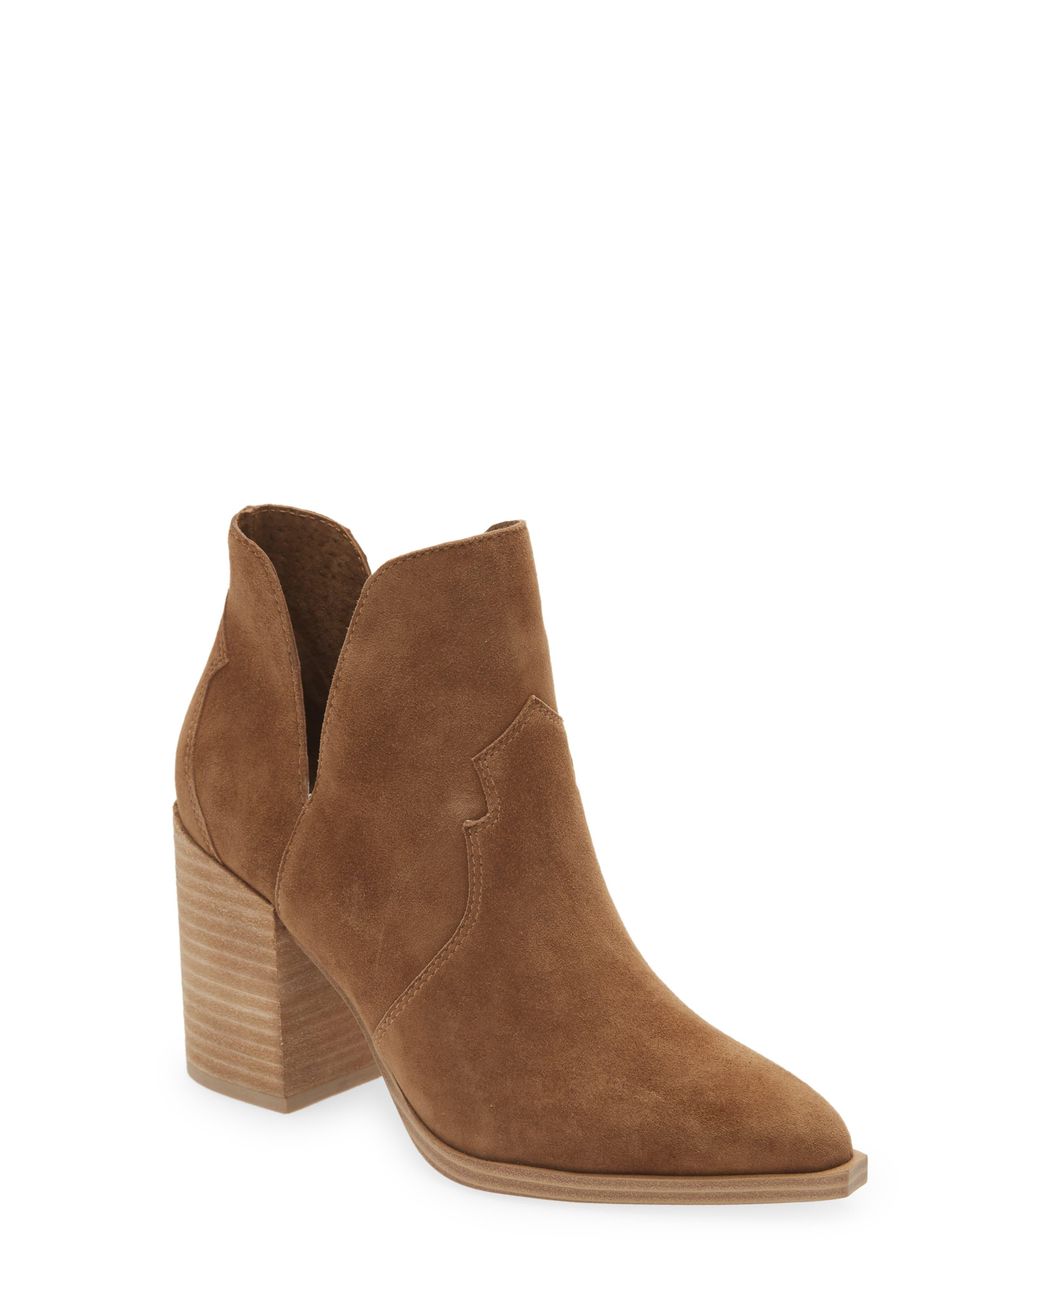 Steve Madden Chaya Pointed Toe Bootie in Brown | Lyst